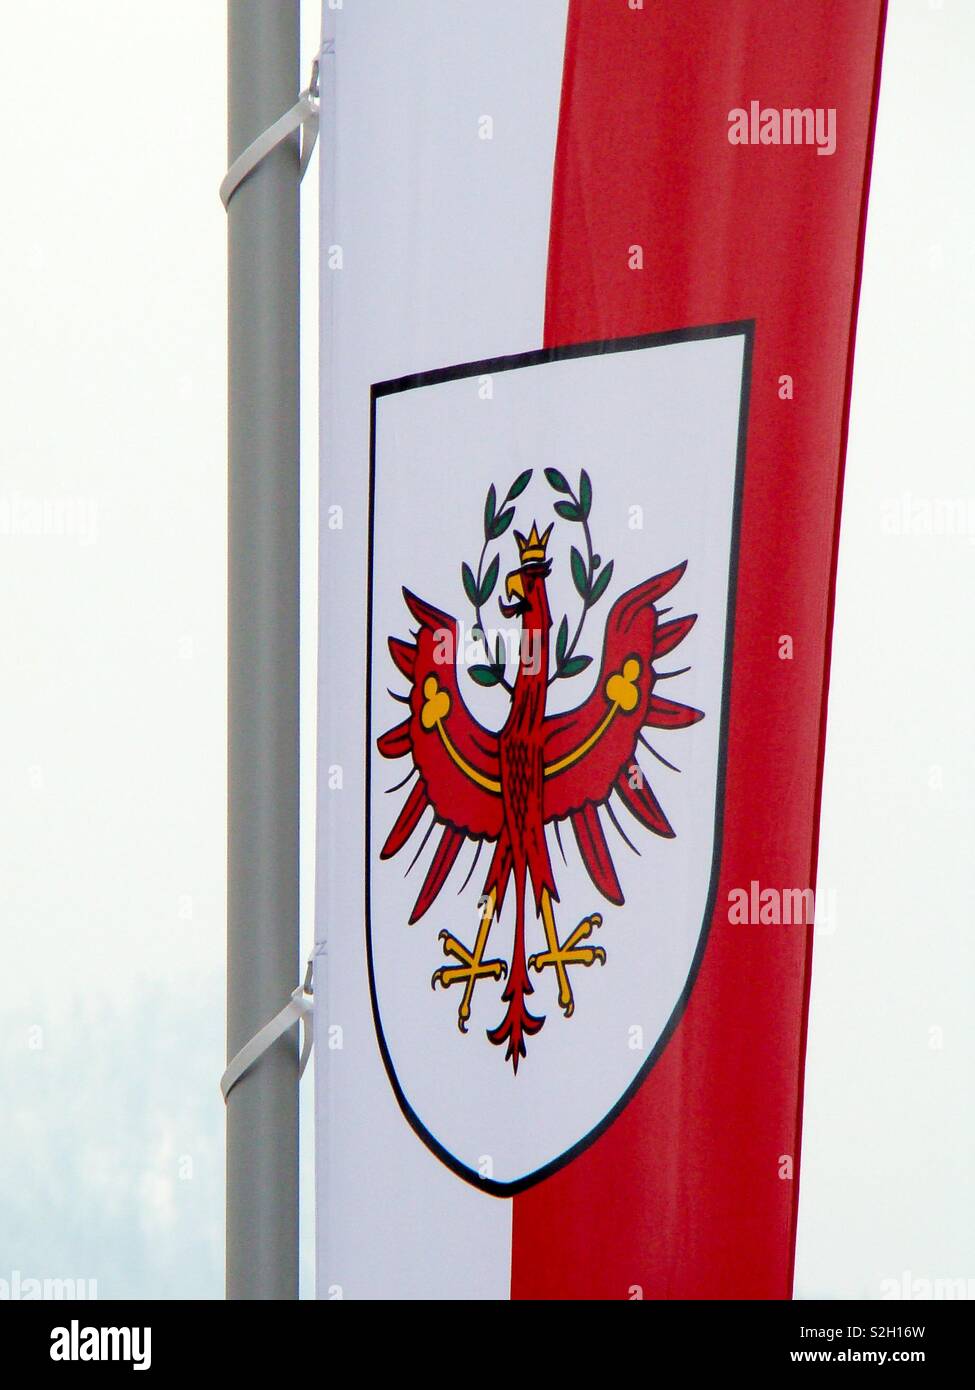 The coat of arms on the red white flag of Tyrol in Austria shows a red  eagle with golden crown and green wreath Stock Photo - Alamy